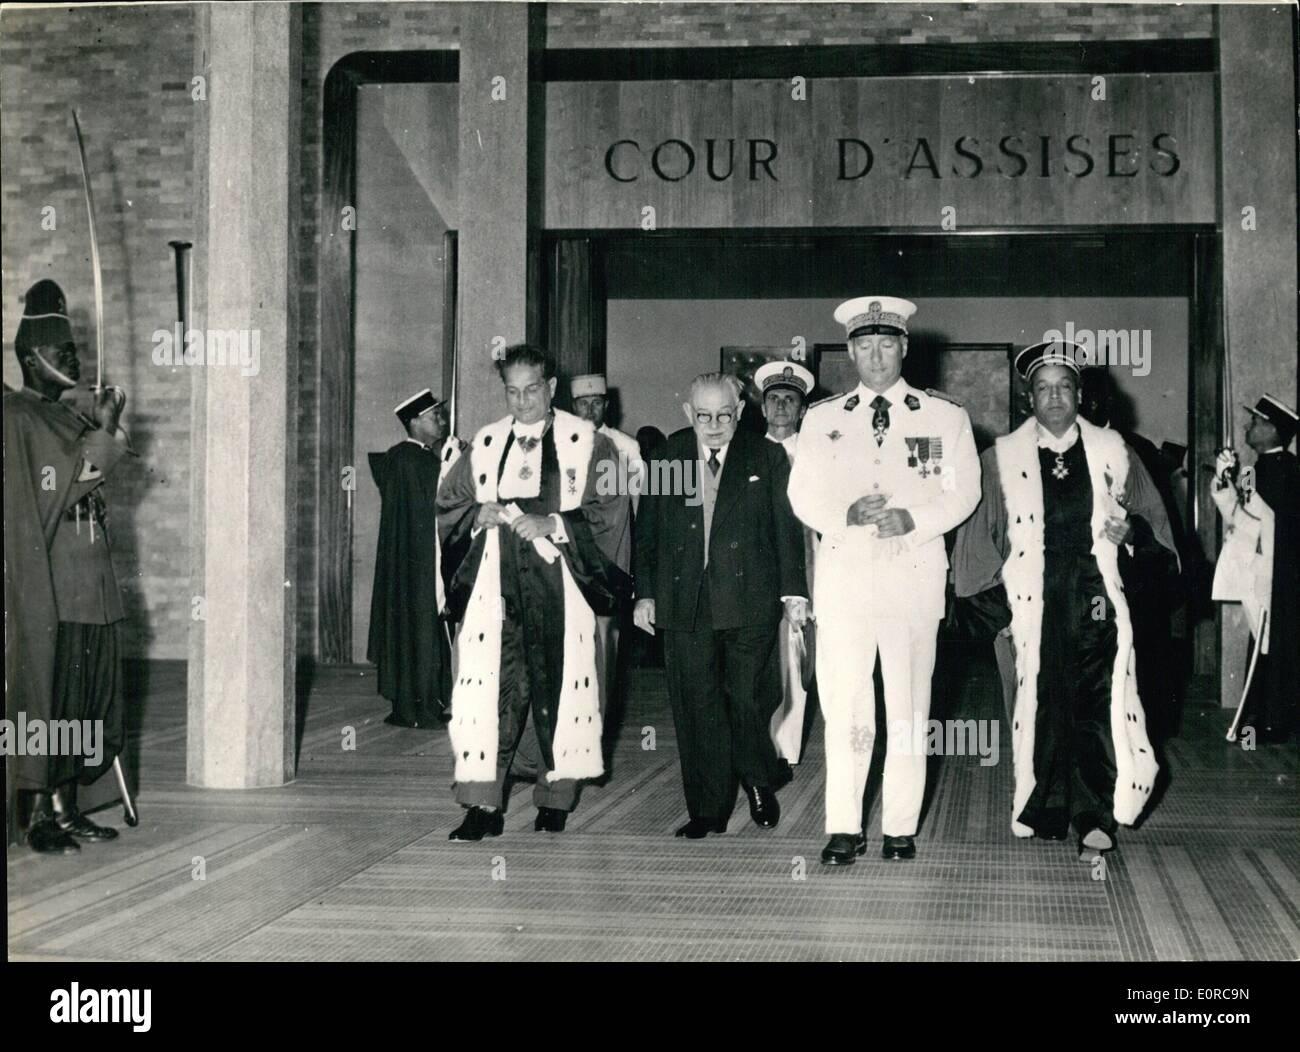 Dec. 12, 1958 - New law courts opened at Dakar: The new buildings houseing the Dakar Law Courts were opened in the Senegal Capitla recently. Photo shows High Commissioner P. Messmer; the First President of the Court Pompei, Public Prosecutor Linval and President Chaumie leaving the Court of Assizes after the opening ceremony. Stock Photo